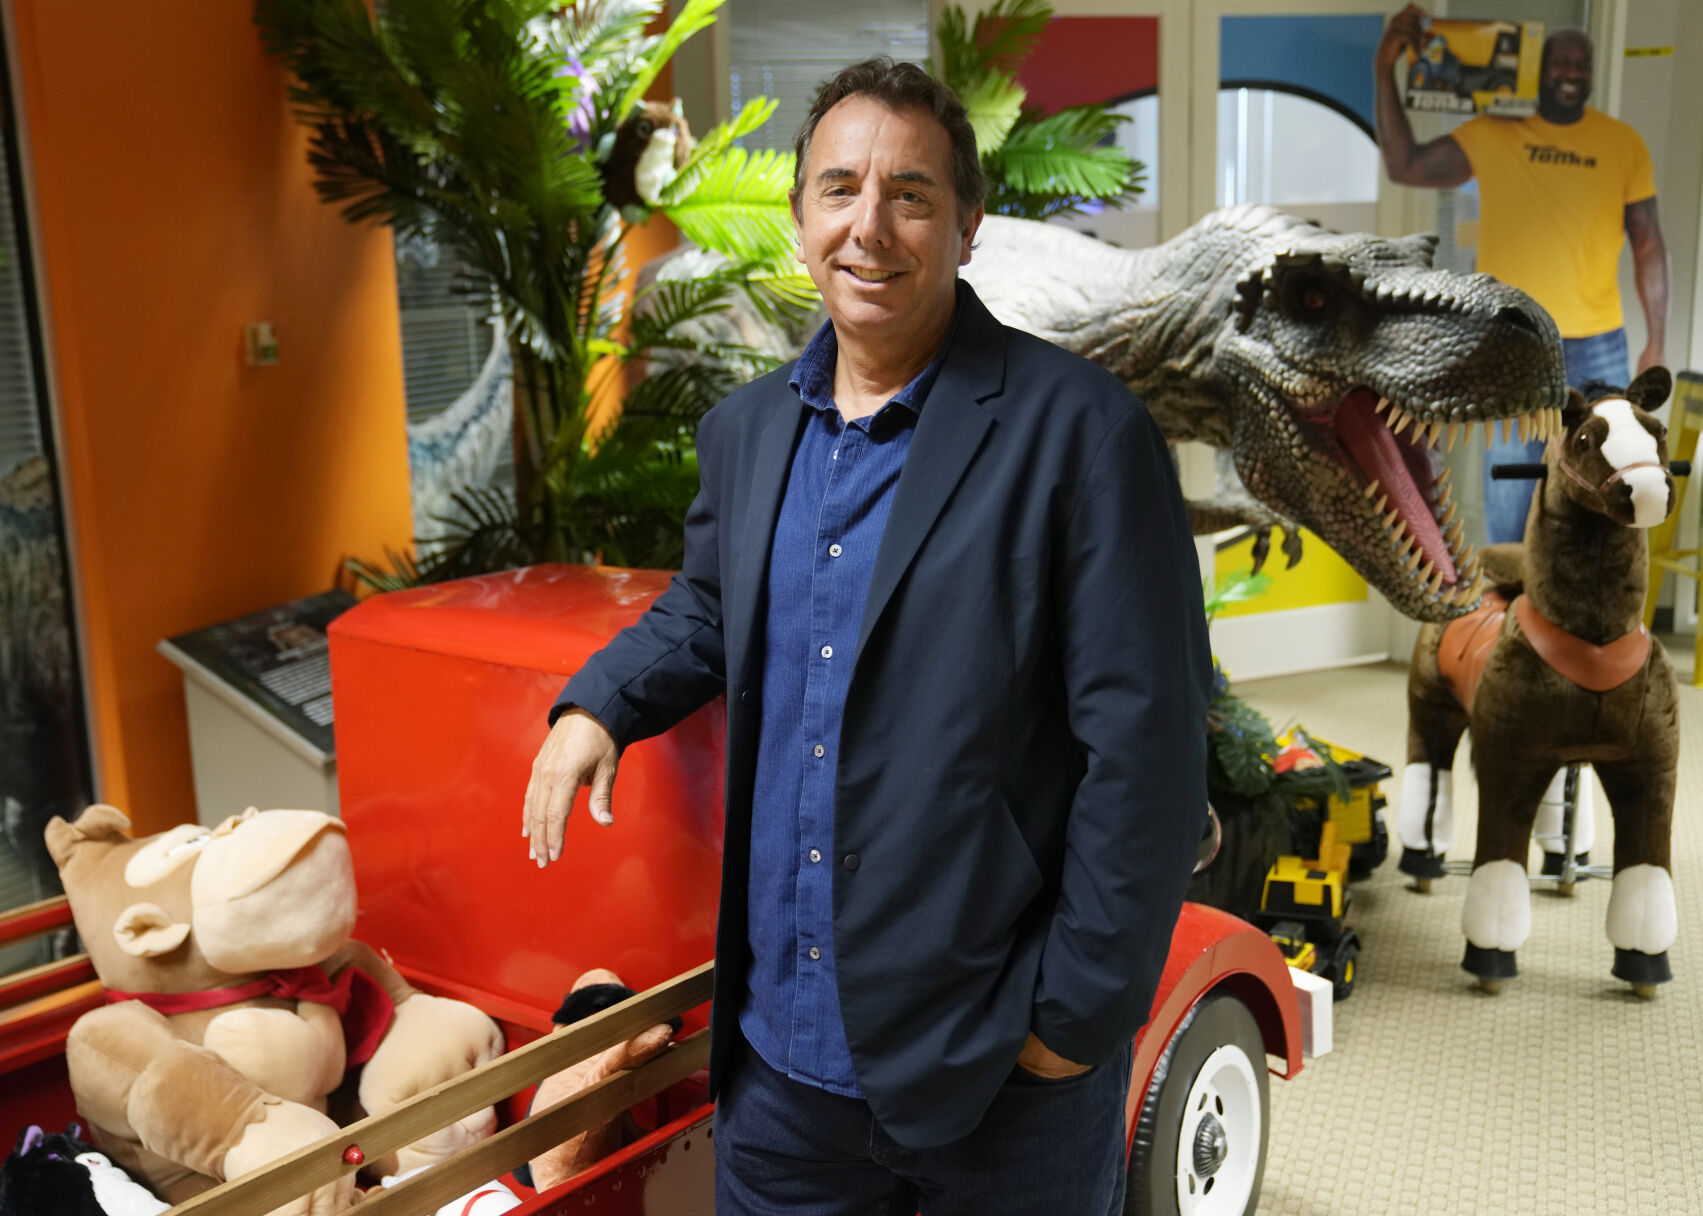 <p>Jay Foreman, CEO of Basic Fun!, stands inside his toy company, Thursday, April 6, 2023, in Boca Raton, Fla. Foreman had to temporarily scuttle plans for an acquisition due to the credit crunch. (AP Photo/Marta Lavandier)</p>   PHOTO CREDIT: Marta Lavandier 